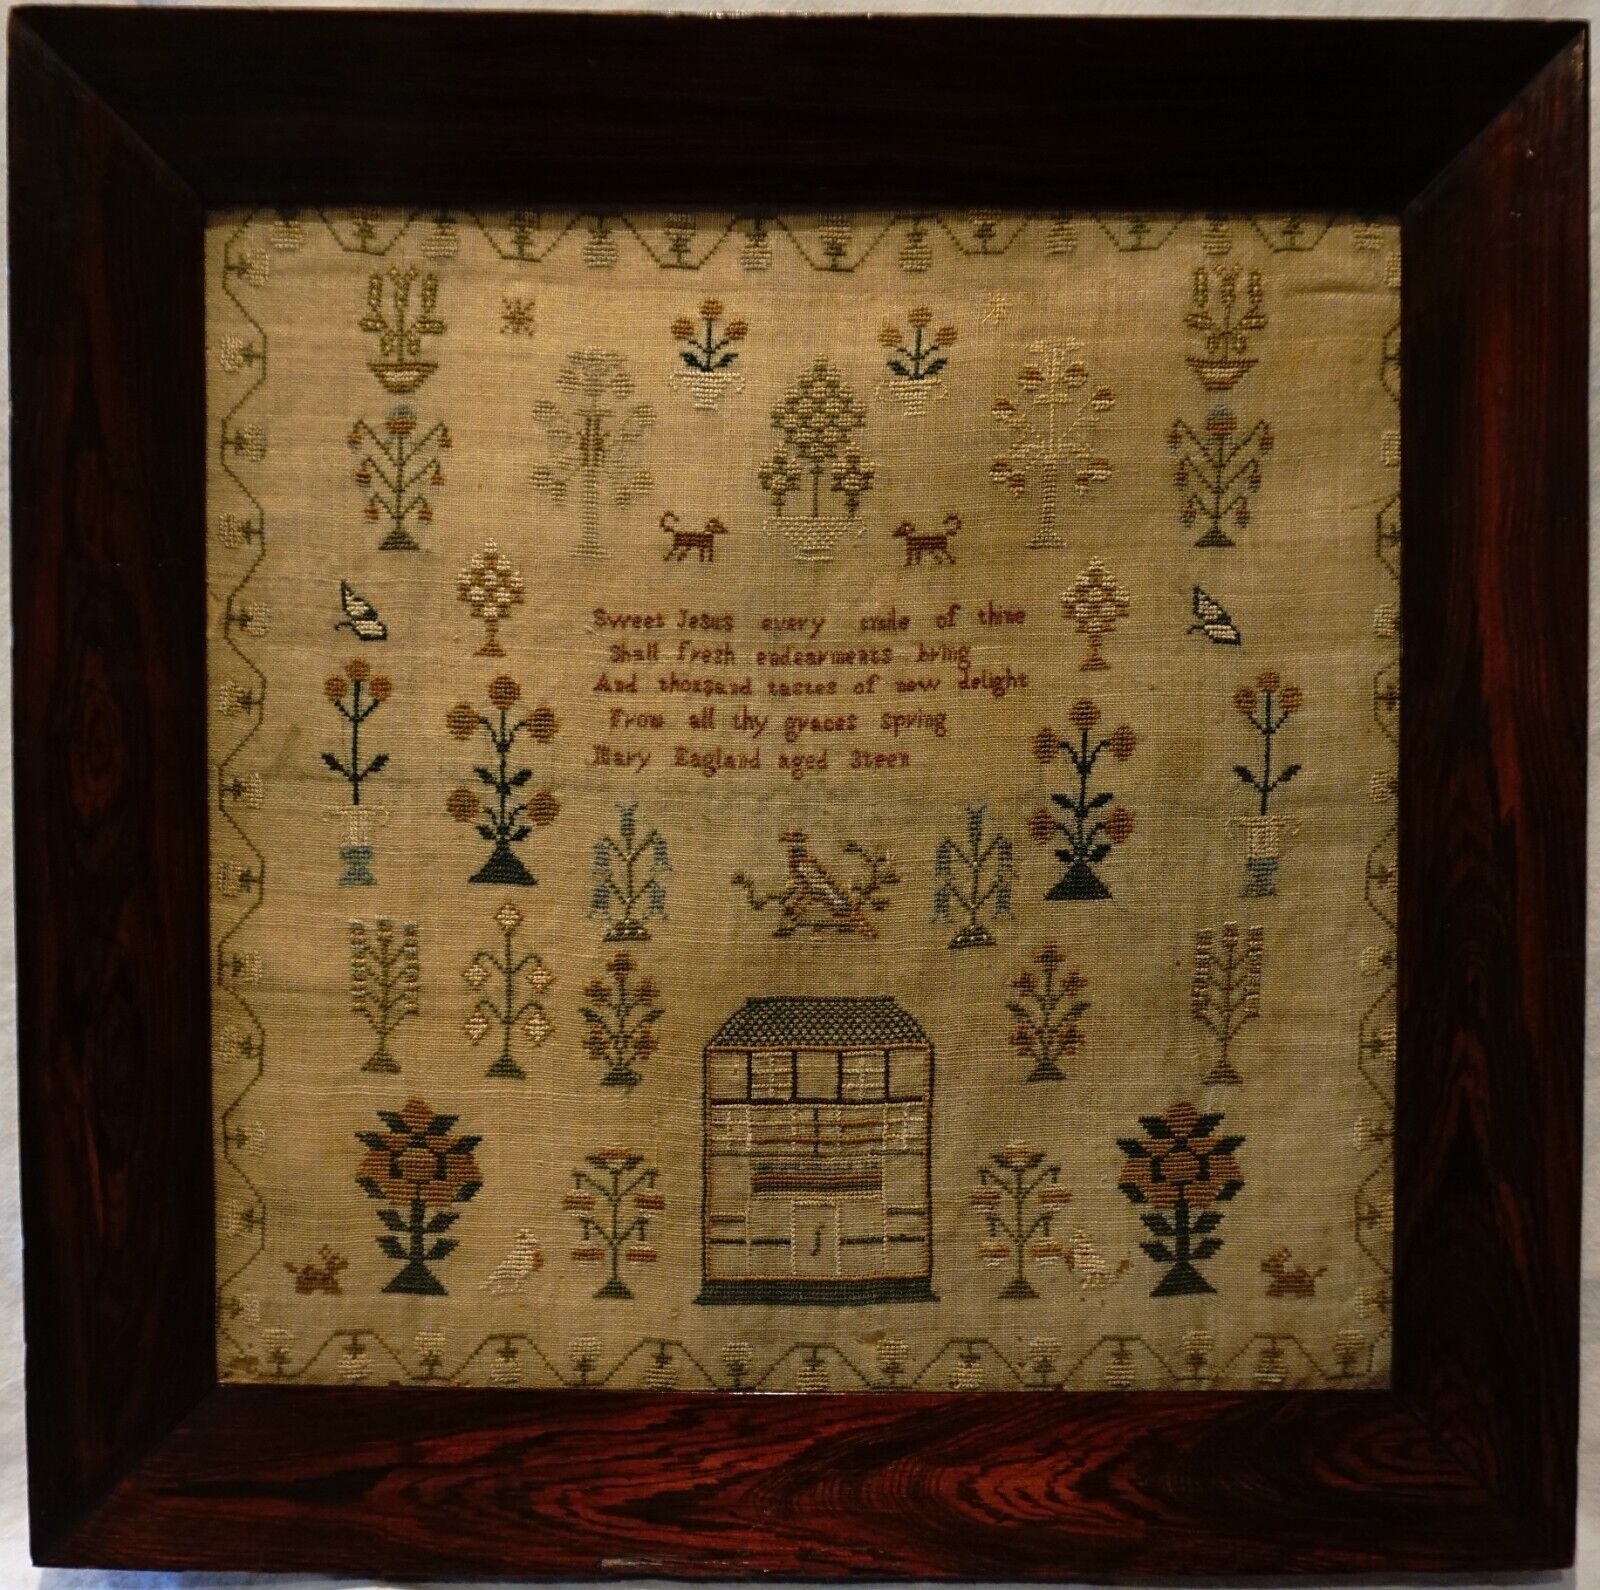 EARLY 19TH CENTURY HOUSE, MOTIF & VERSE SAMPLER BY MARY EAGLAND AGED 13 - c.1840